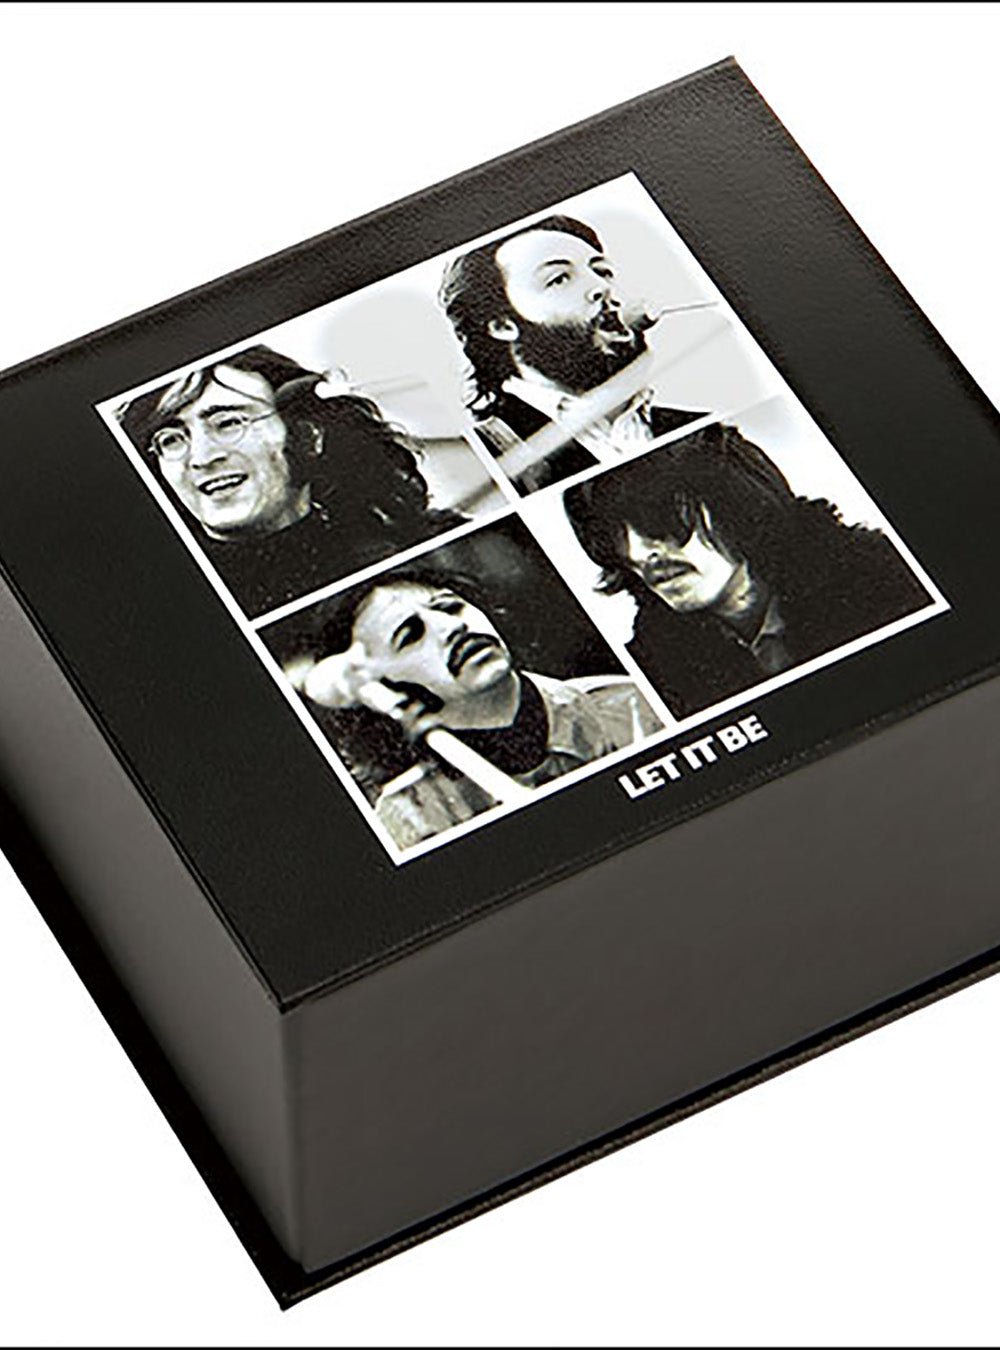 THE BEATLES LET IT BE 50TH ANNIVERSARY ROOFTOP CONCERT TRIBUTE WATCH MADE IN JAPAN Only 1 left in stockWatchesjapan-select